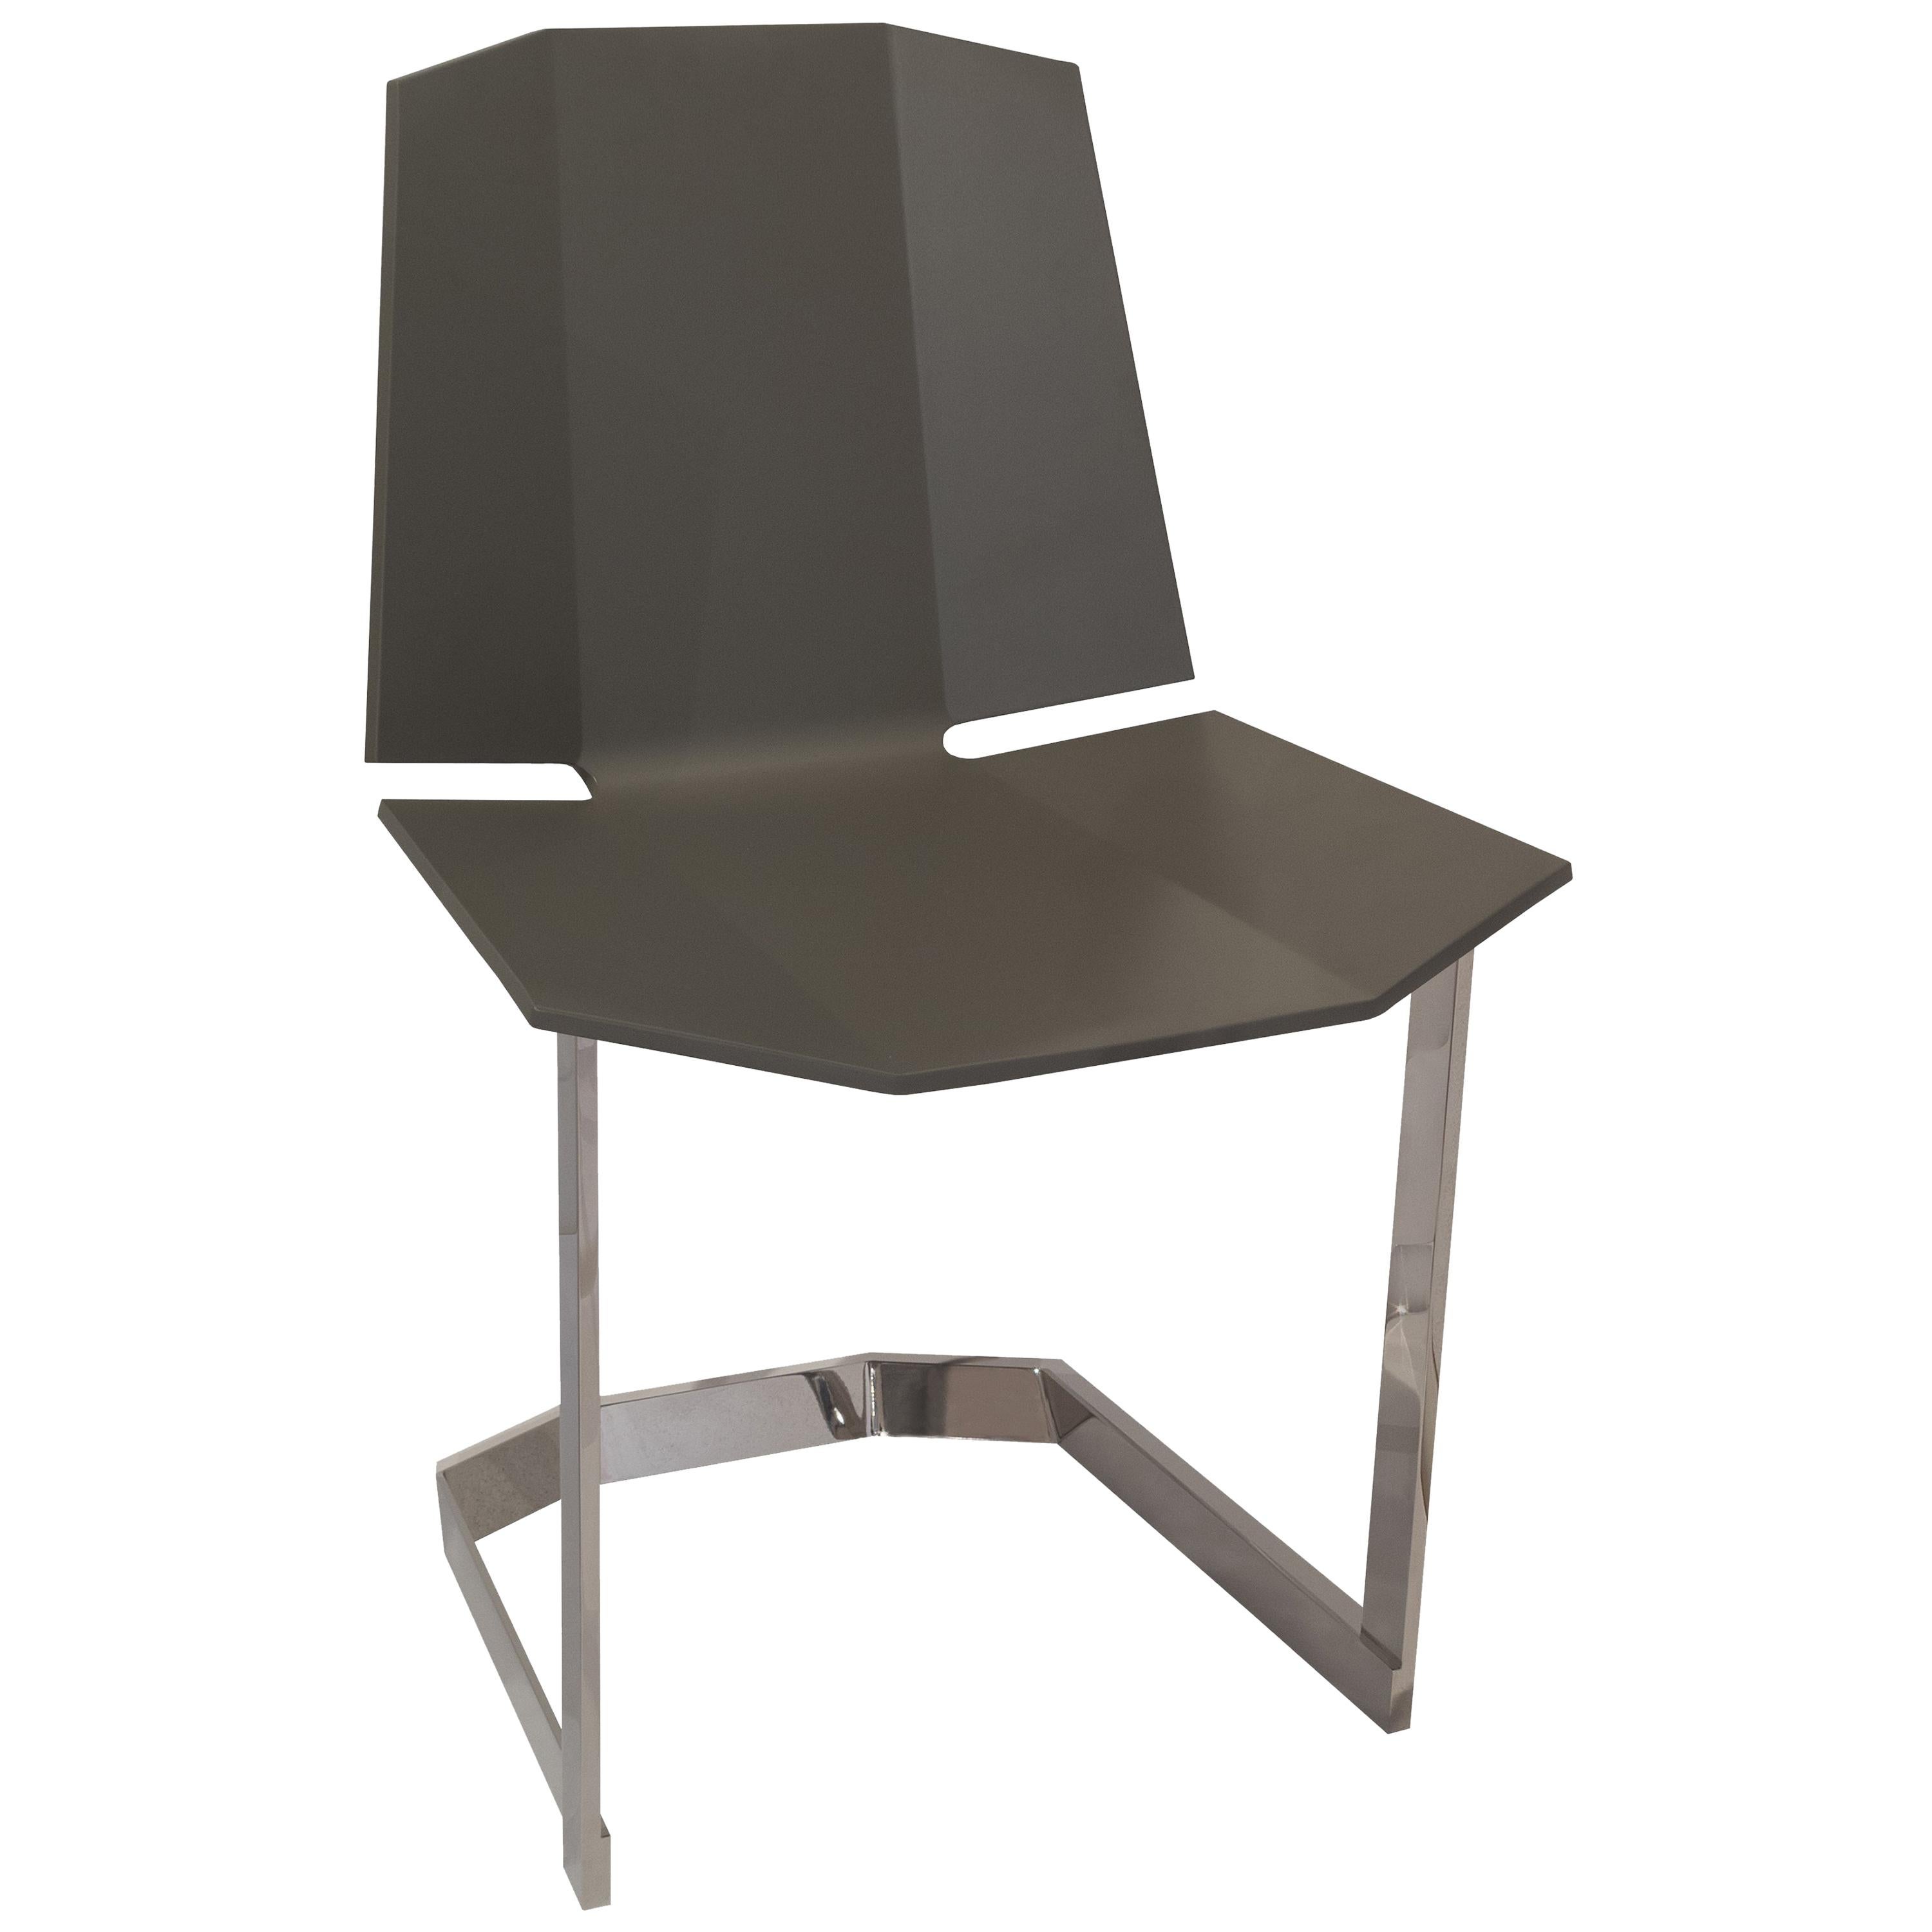 Donghia Rex Occasional Chair in Truffle Lacquer For Sale